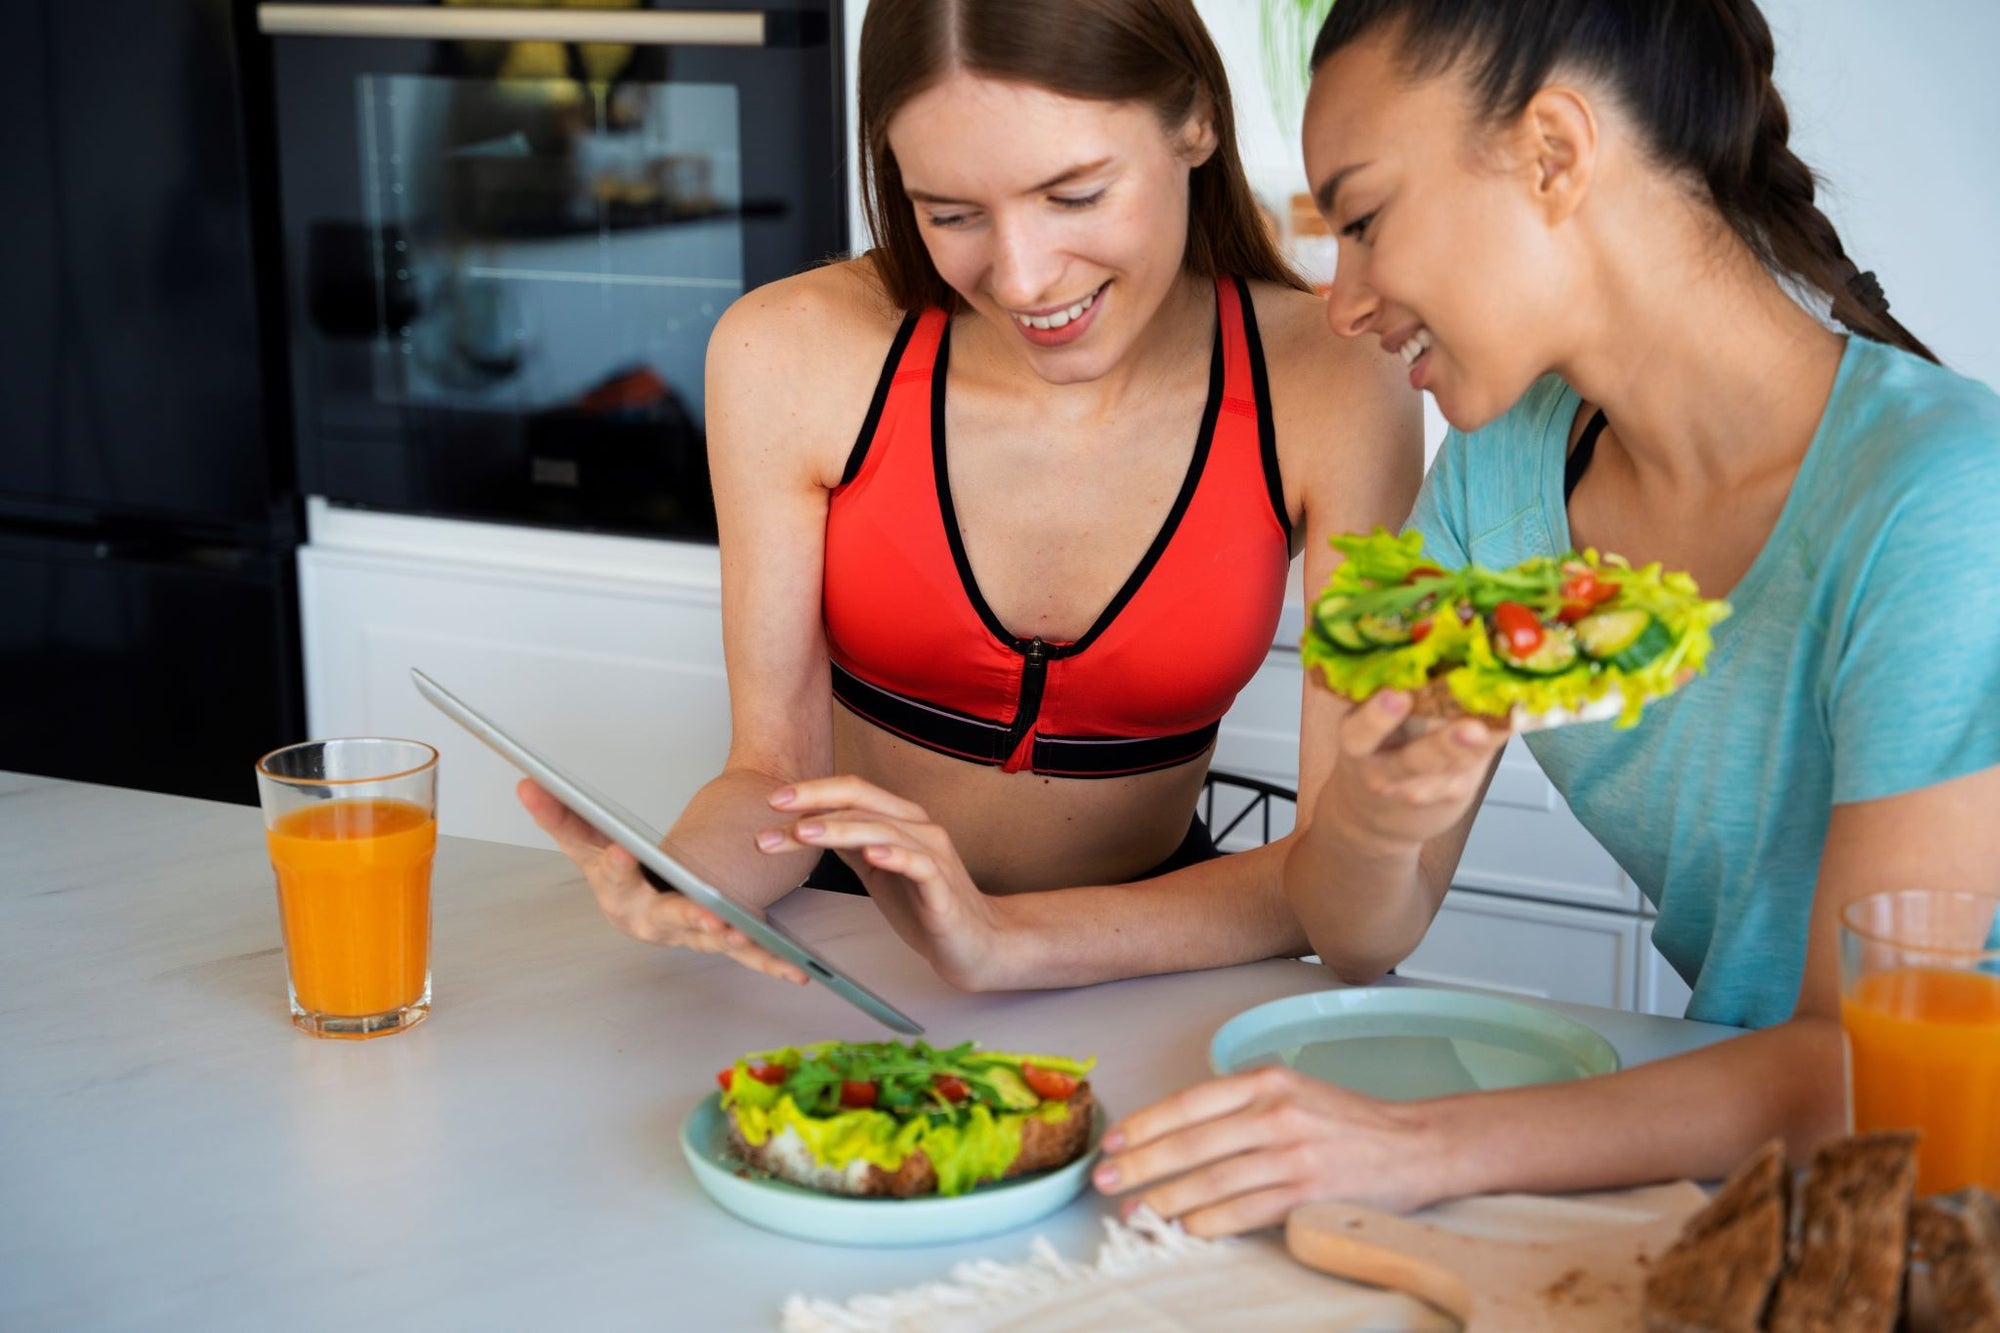 Two women discussing the best nutrition plan for training while enjoying healthy meals